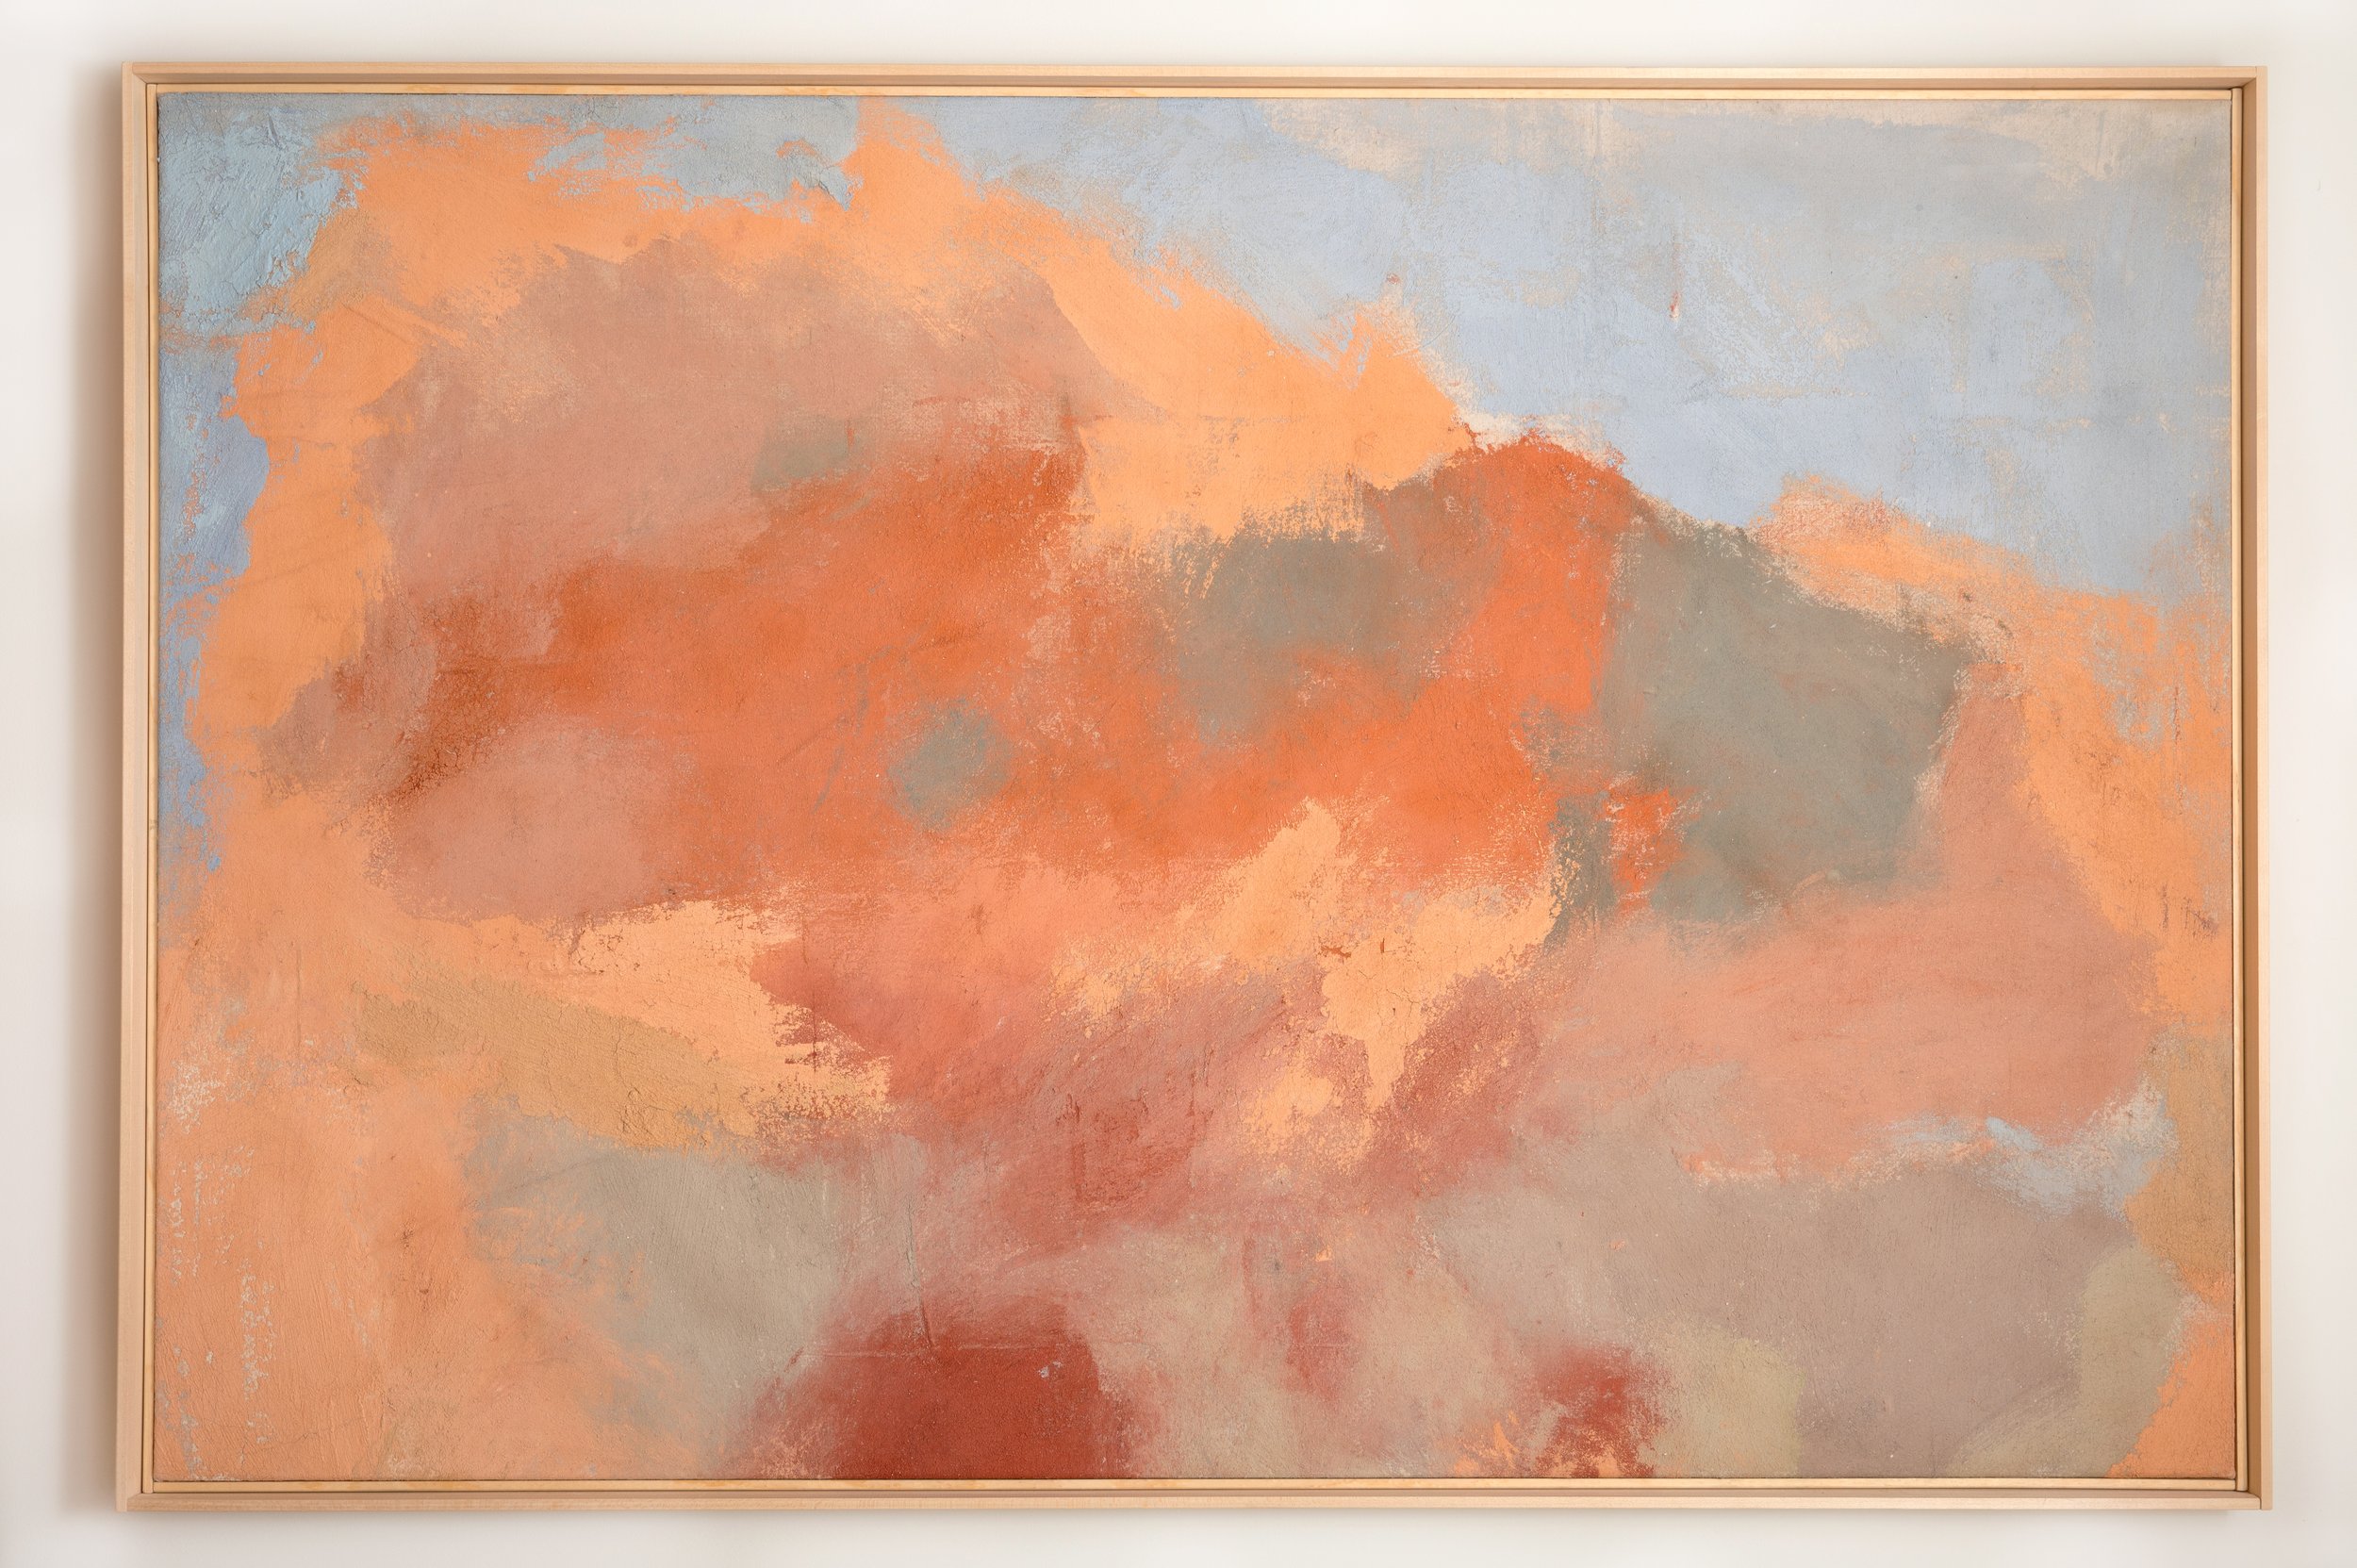   Sands of Sundown       61.5” x 2” x 41.5” / 2022 earth pigments on stretched raw canvas with pine flute frame 